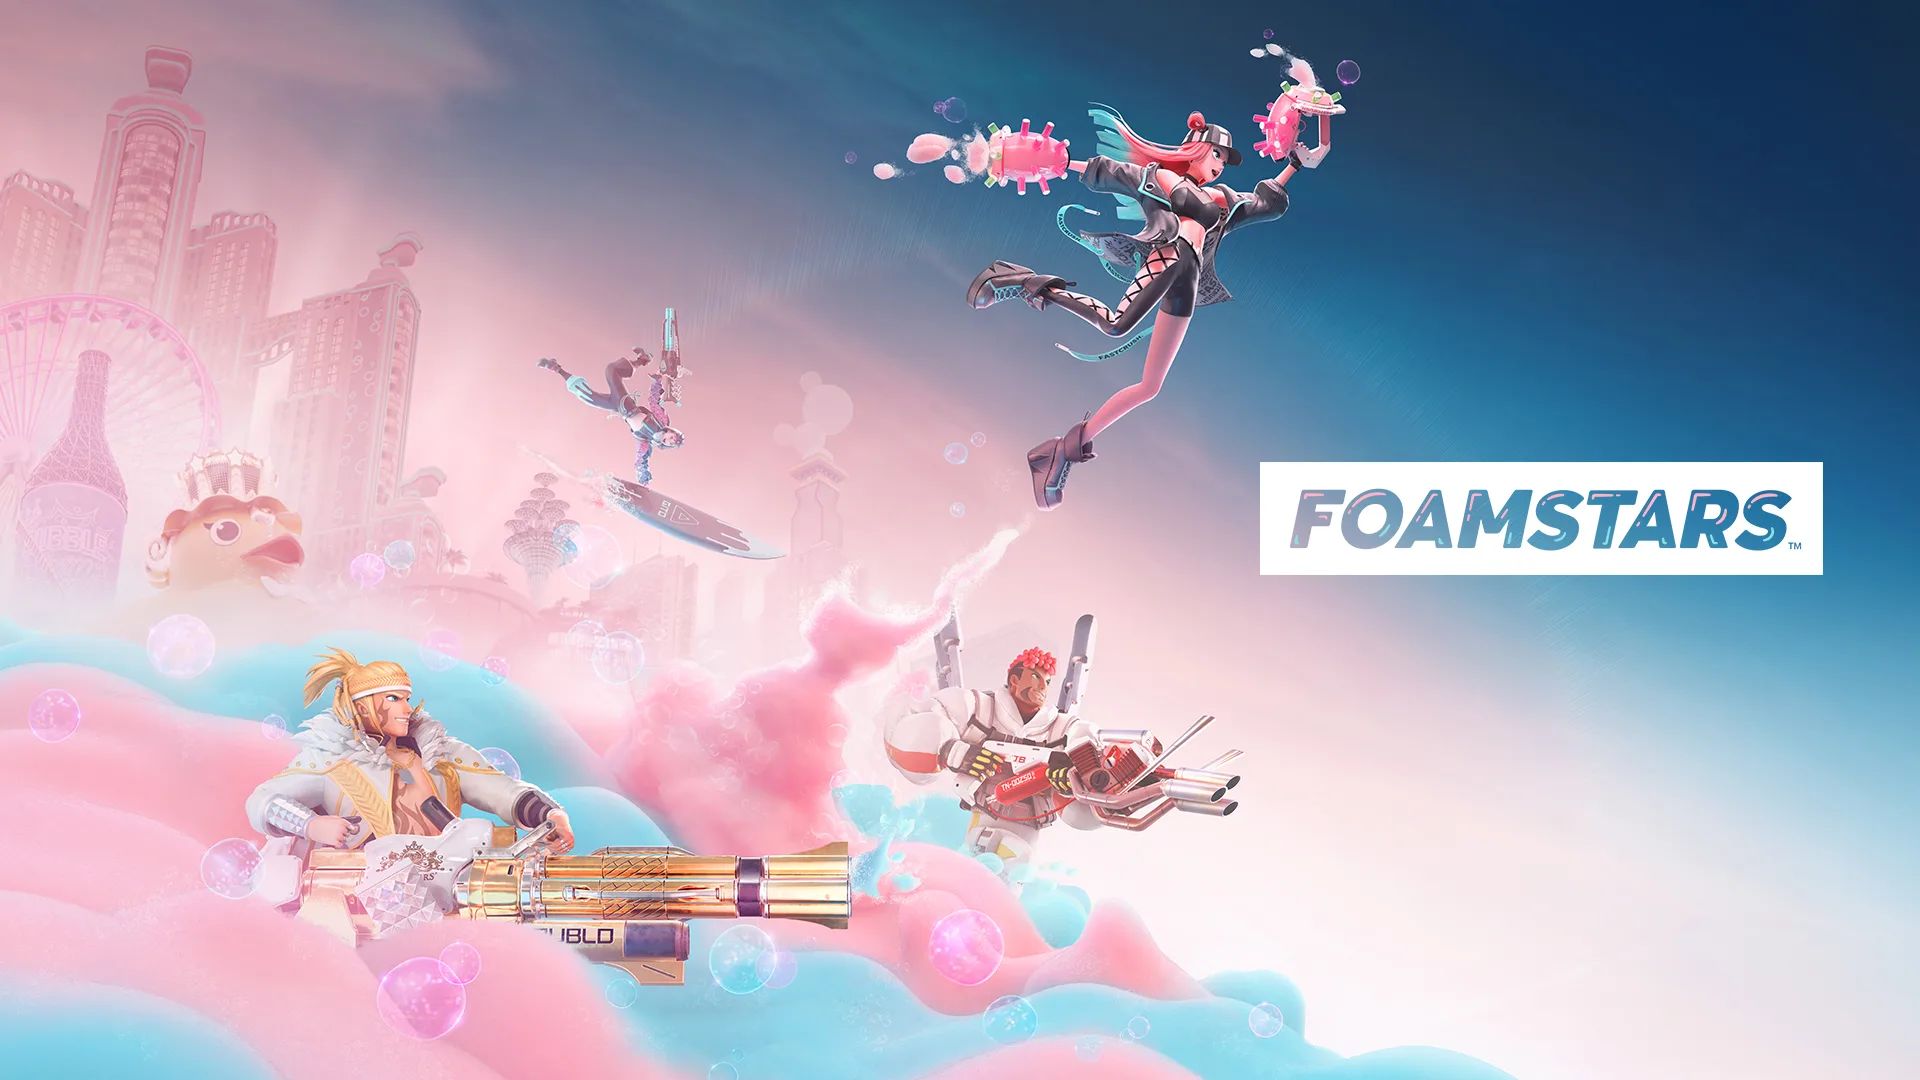 Foamstars is Out Now on PS4 and PS5